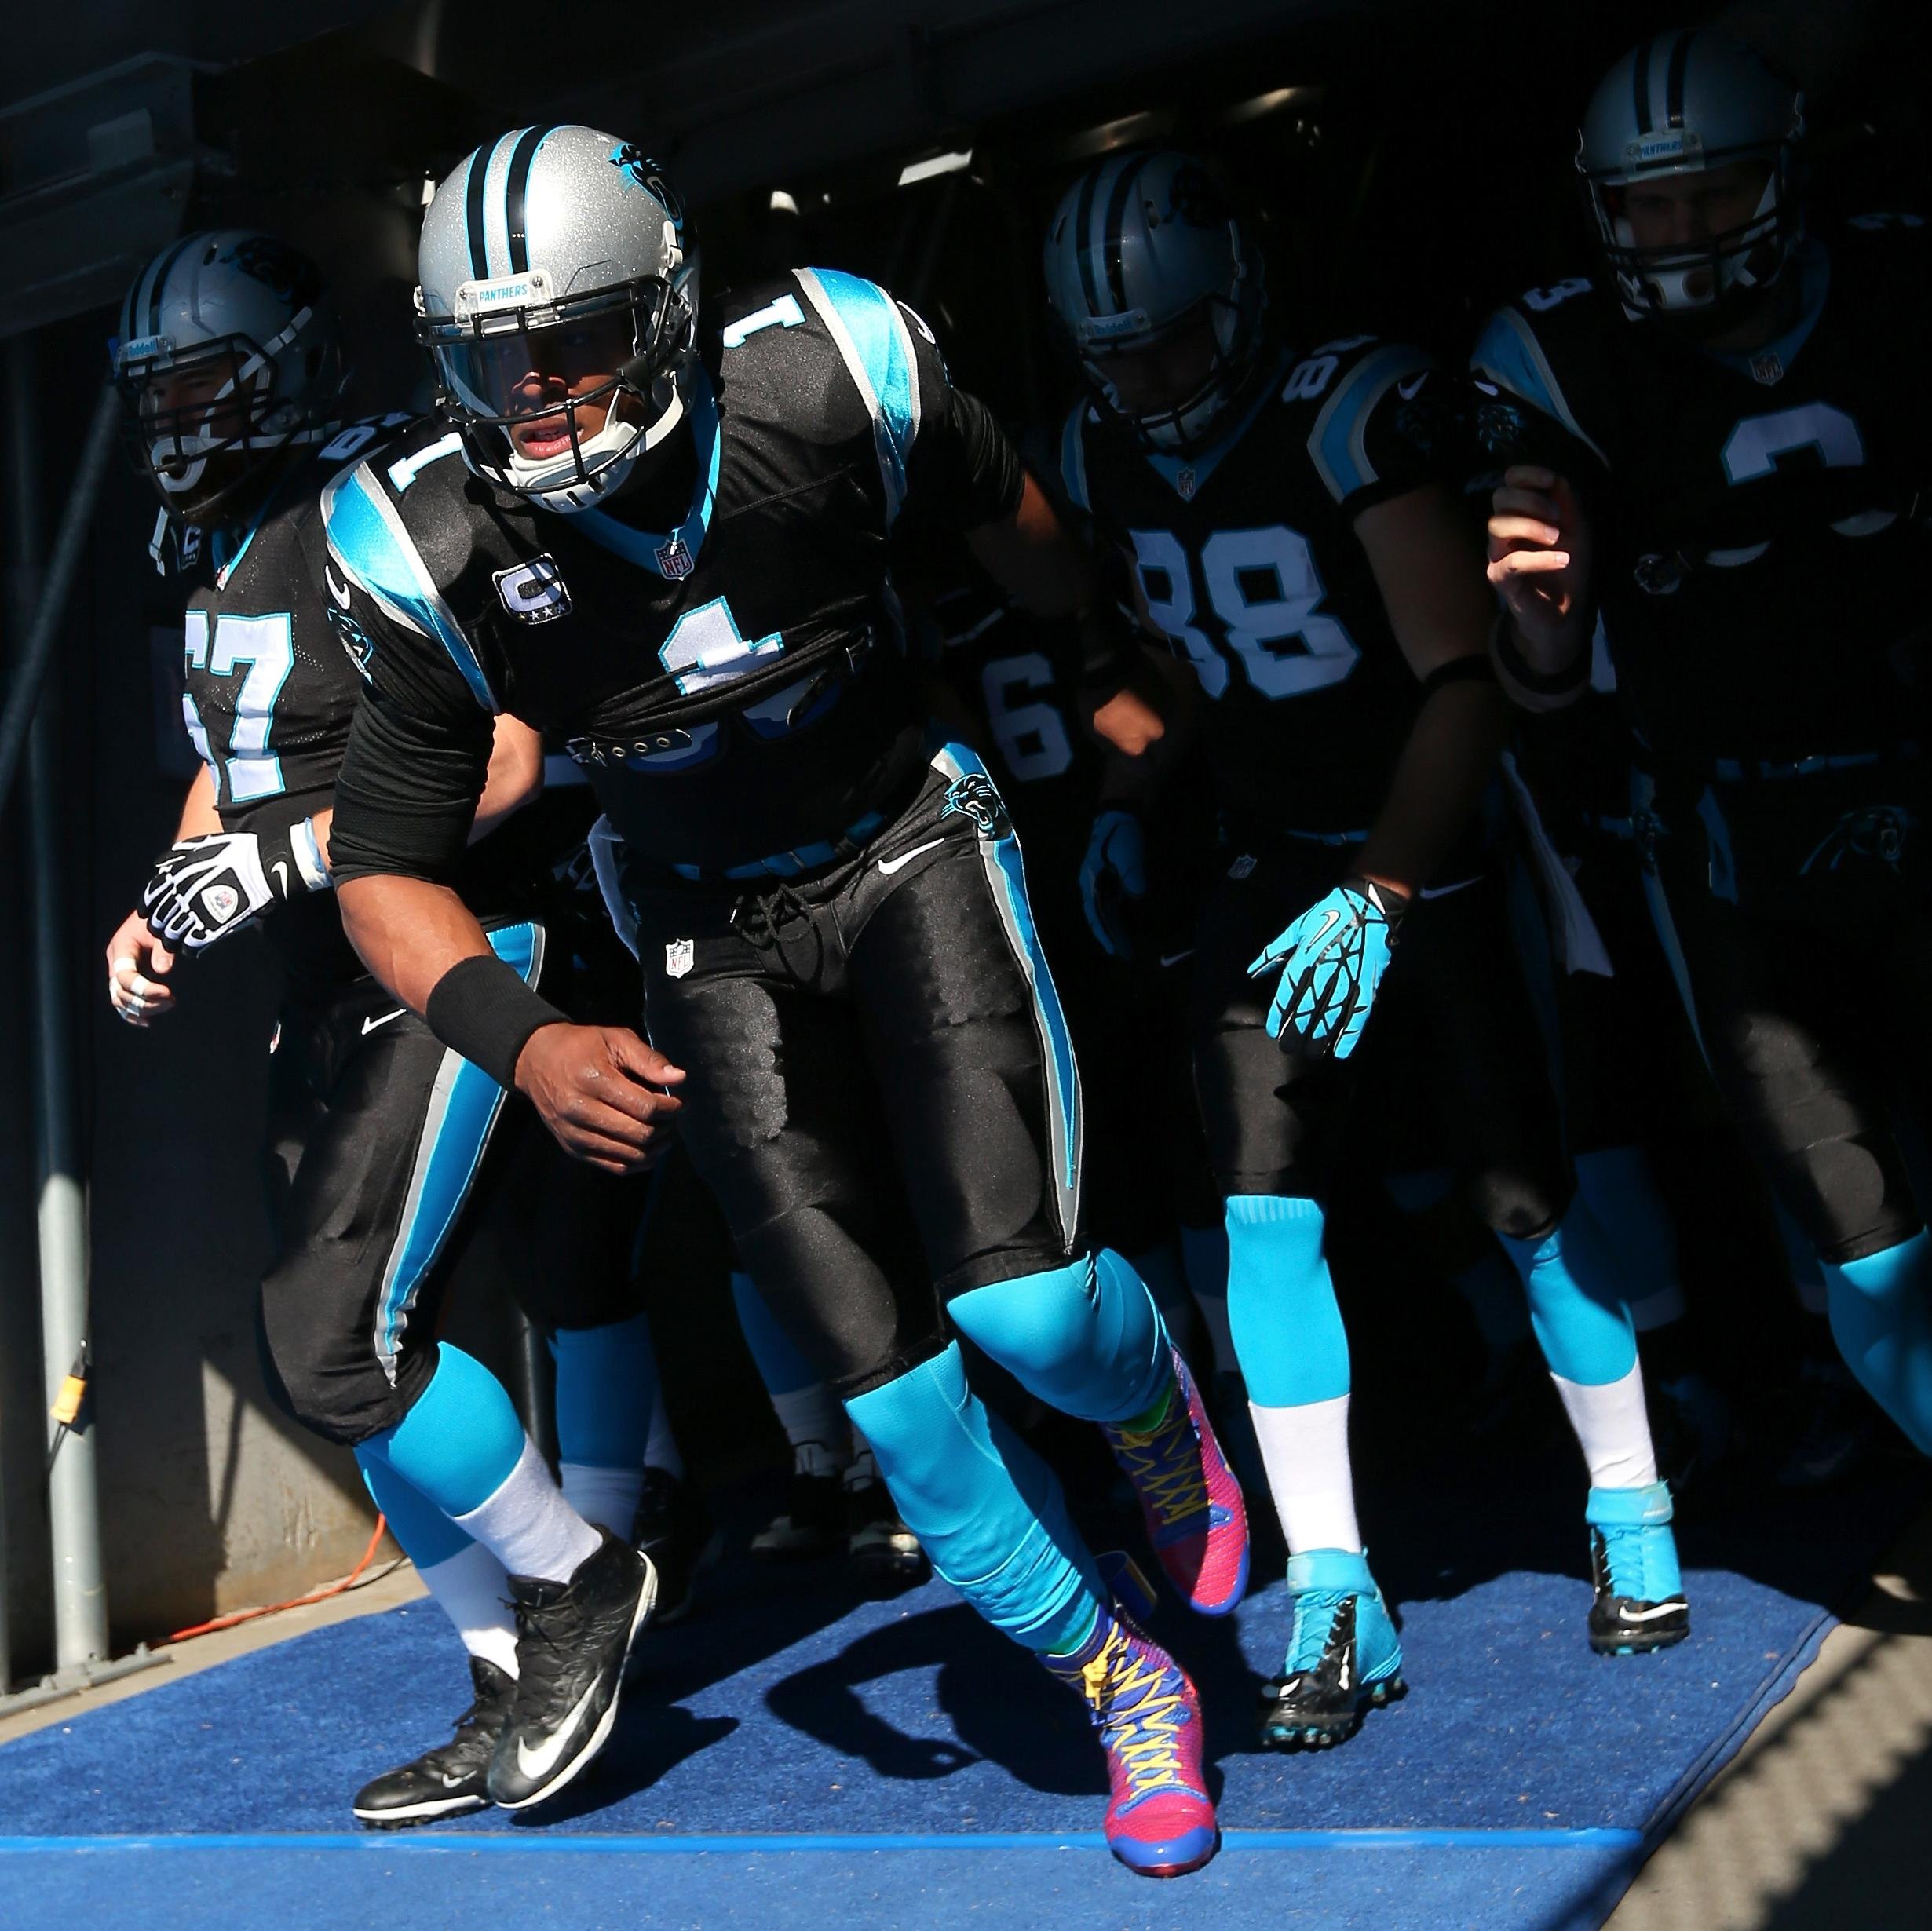 Carolina Panthers NFL Football, Draft and Fantasy news from the @ScoutMedia network.
Email: PanthersonScout@gmail.com